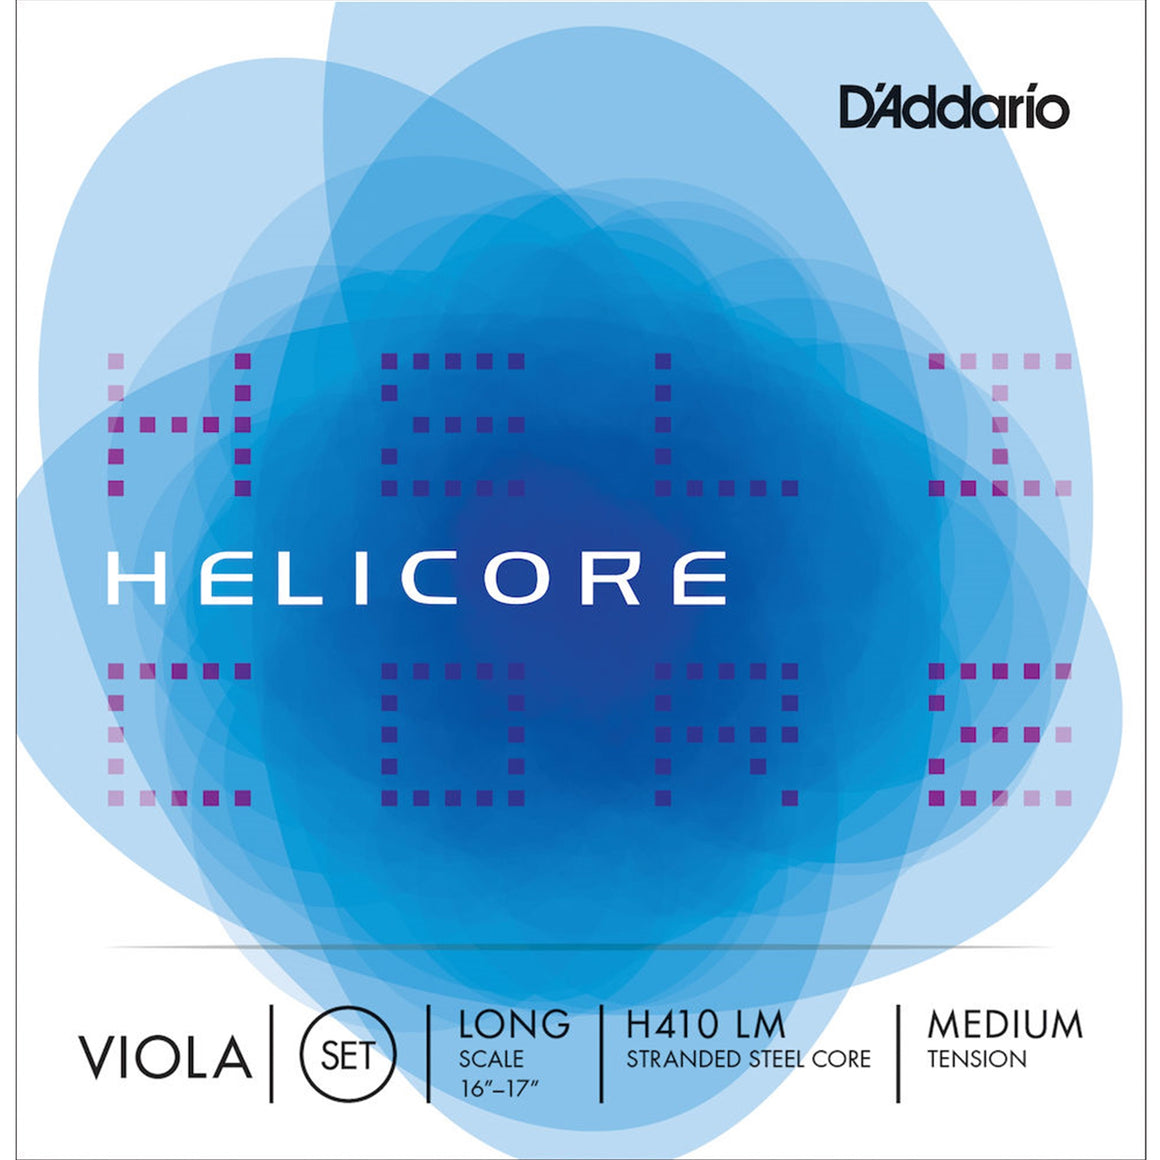 D'ADDARIO H410LM Helicore Viola String Set, Long Scale, Medium Tension 16-16 1/2"